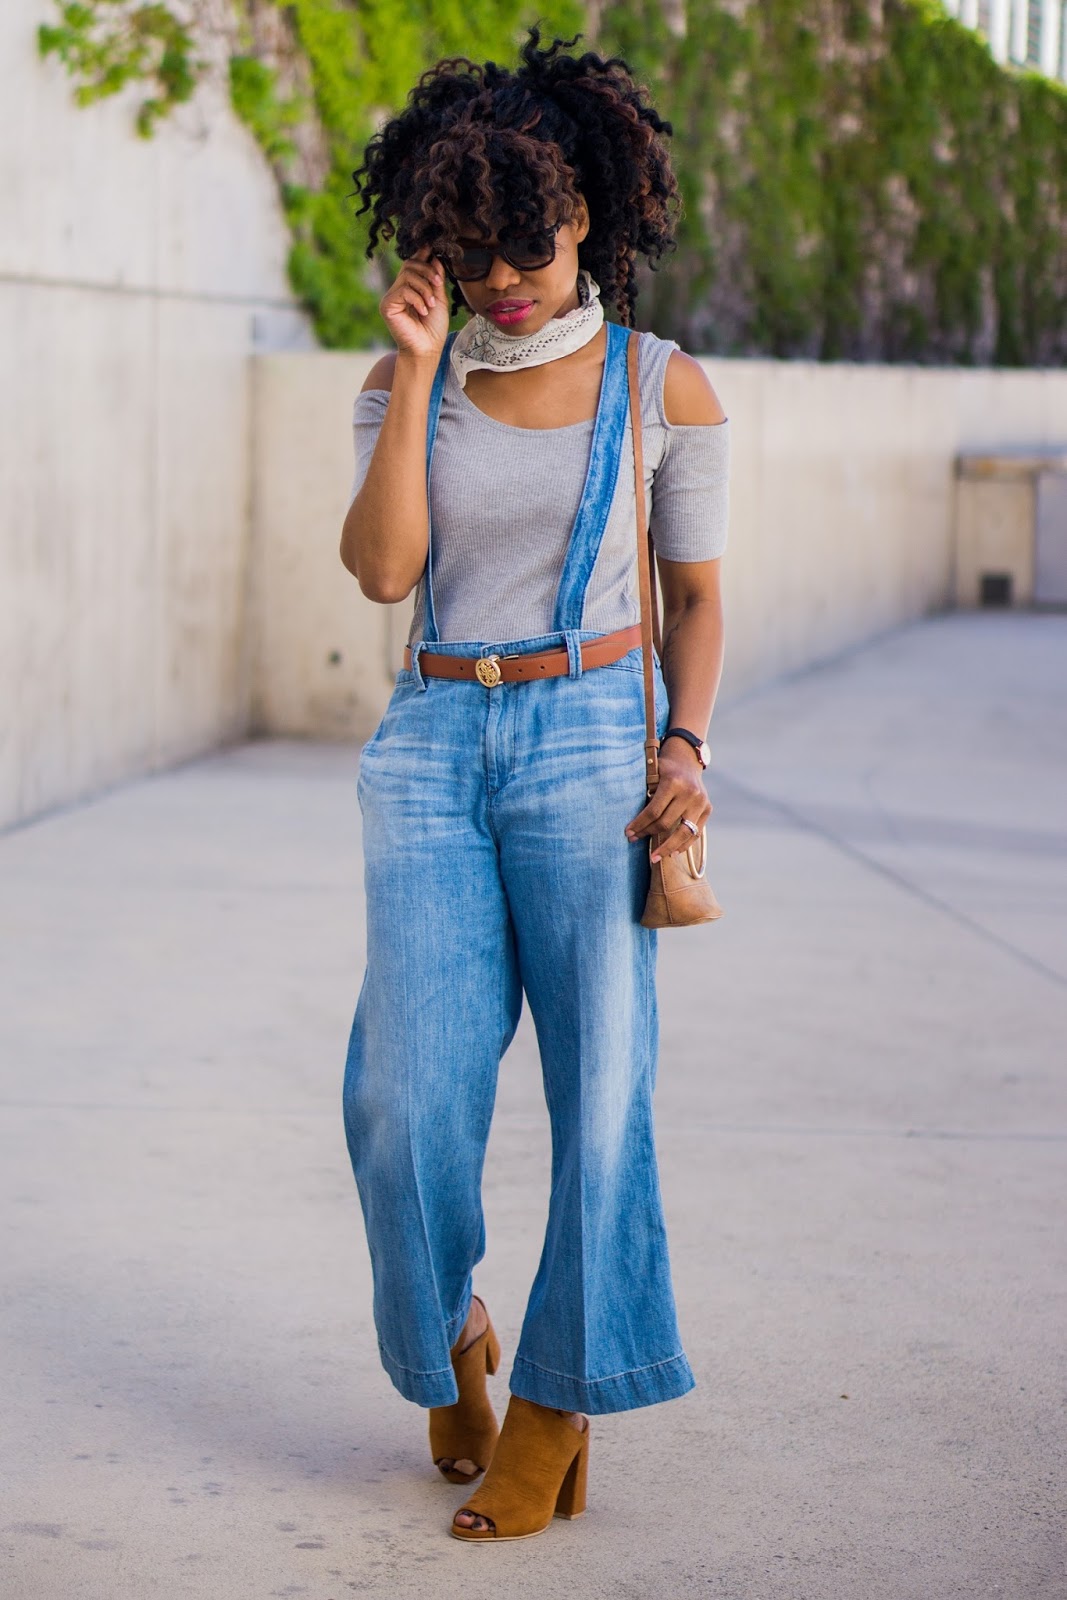 Updated Style: How to Wear Suspender Overalls